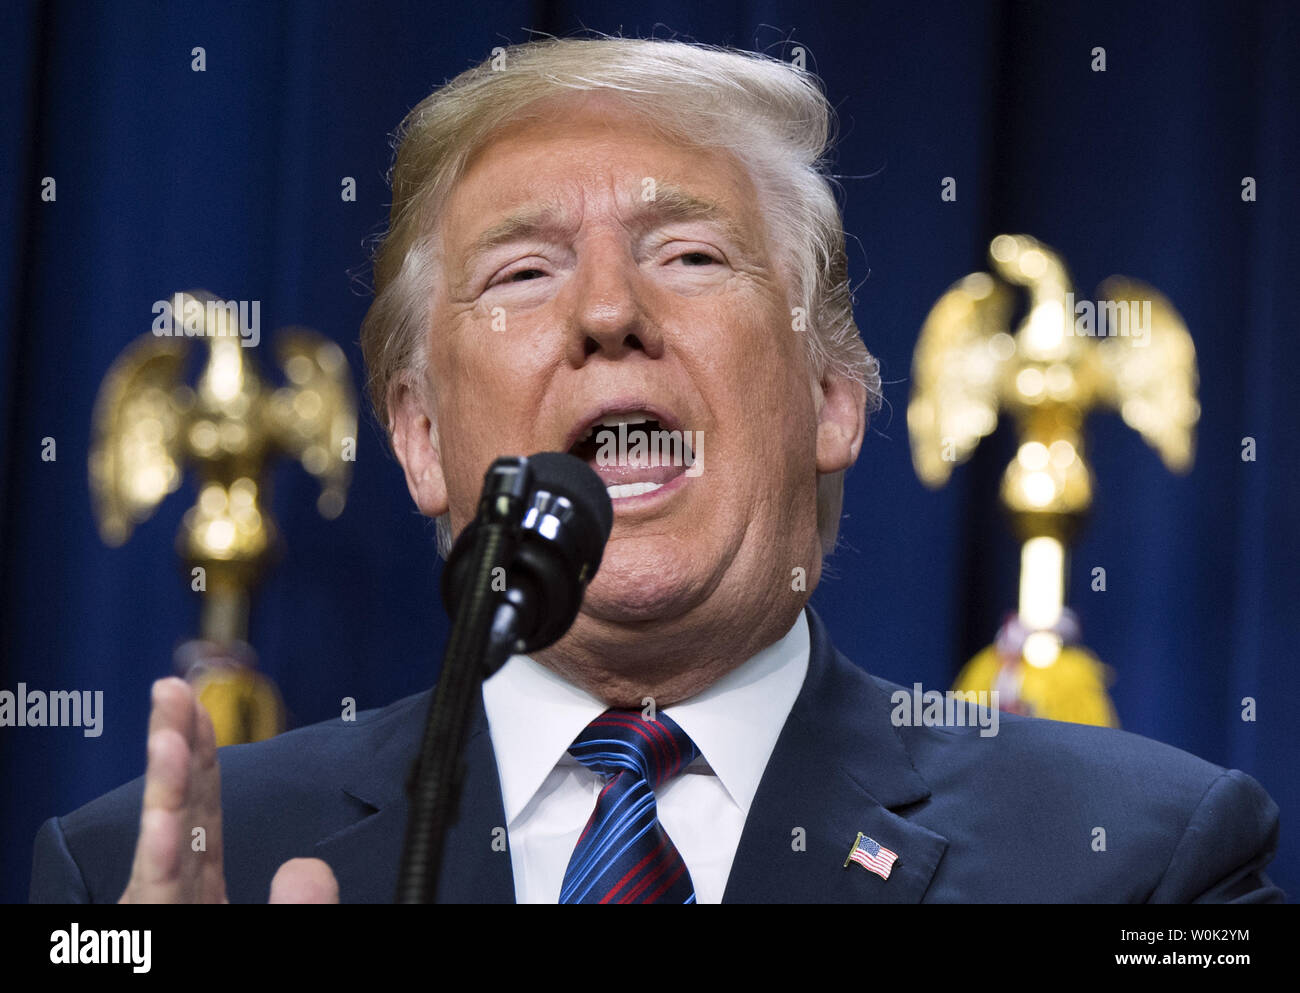 President Donald Trump speaks before signing the Right to Try Act, during a ceremony in the Eisenhower Executive Office Building in Washington, D.C. on May 30, 2018. The bill amends Federal law to allow certain unapproved, experimental drugs to be administered to terminally ill patients who have exhausted all approved treatment options and are unable to participate in clinical drug trials. Photo by Kevin Dietsch/UPI Stock Photo